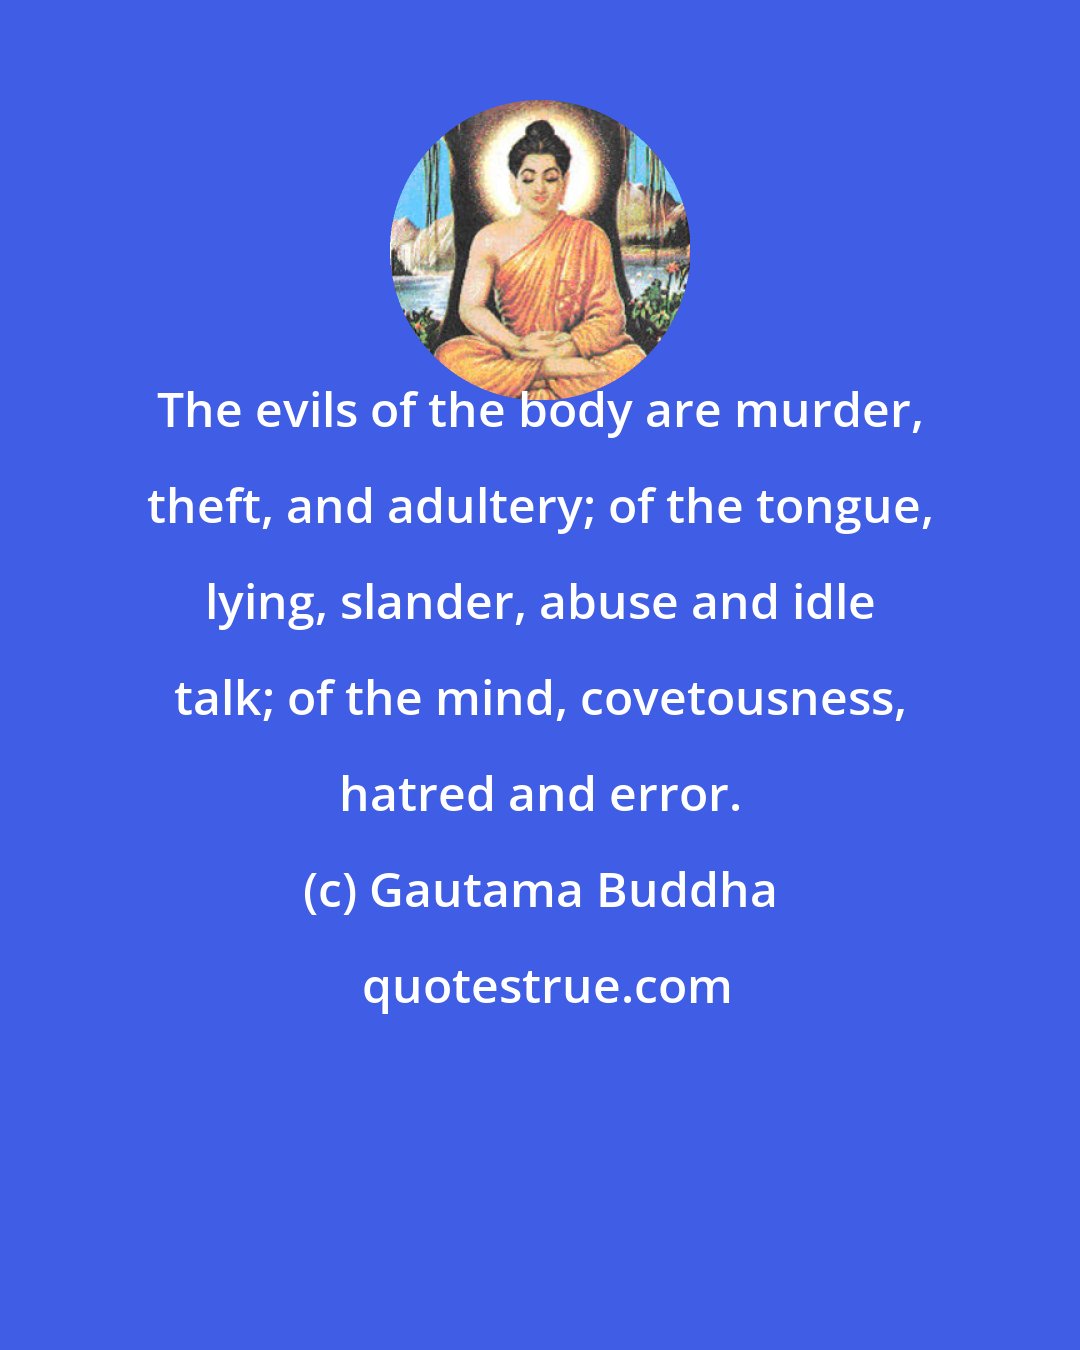 Gautama Buddha: The evils of the body are murder, theft, and adultery; of the tongue, lying, slander, abuse and idle talk; of the mind, covetousness, hatred and error.